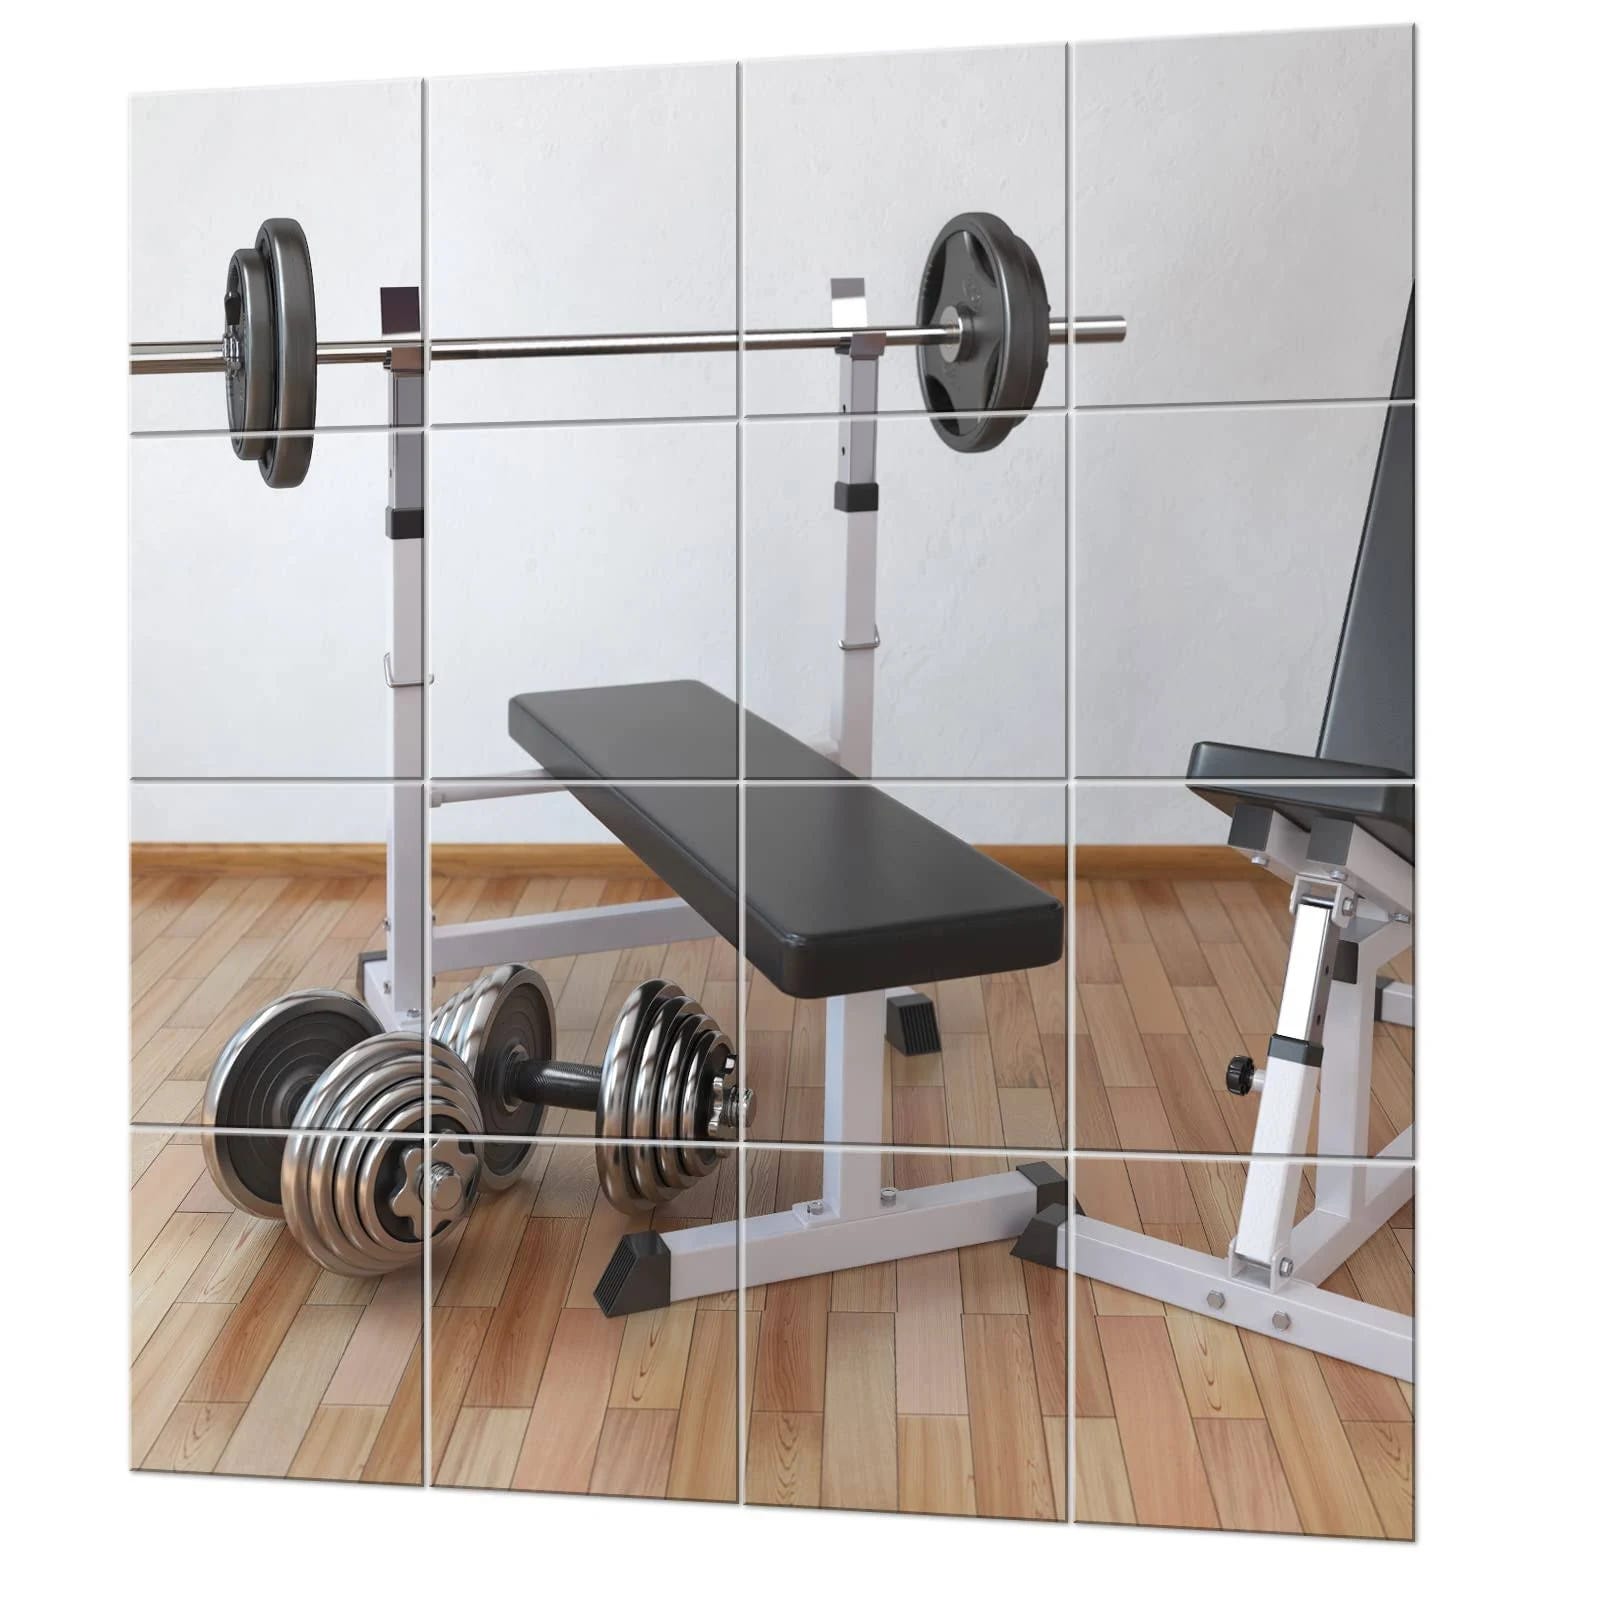 Evenlive Frameless Gym Mirrors for Home Workouts | Image